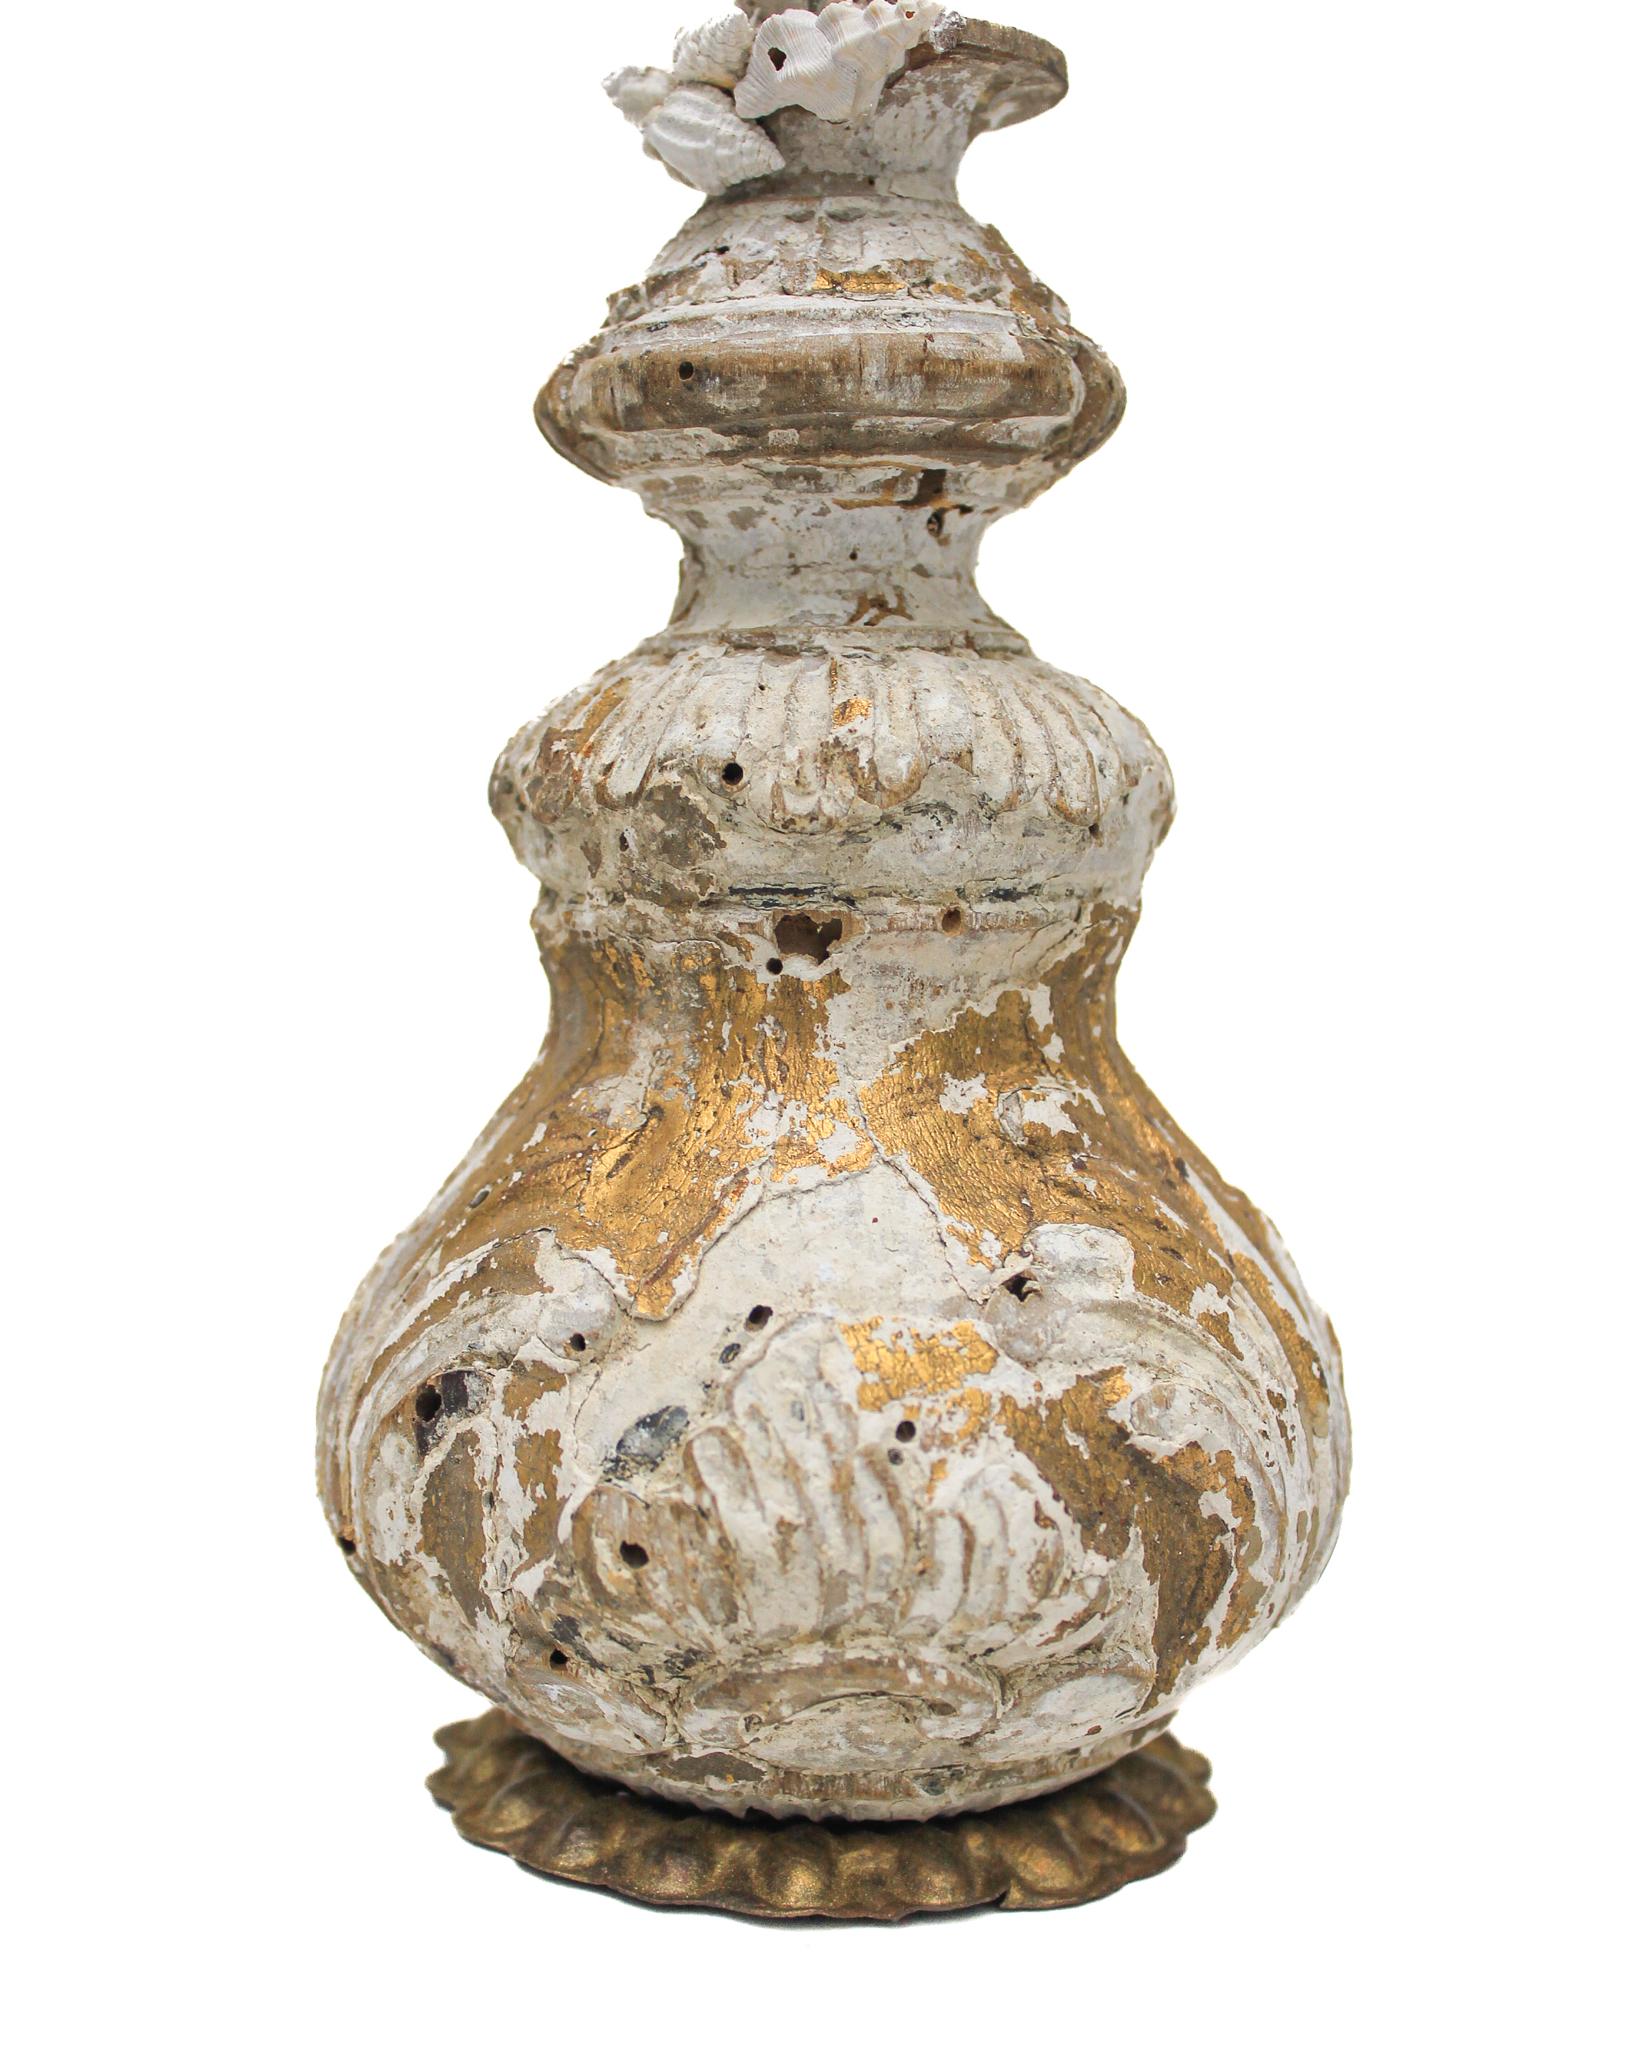 18th Century and Earlier 17th Century Italian Vase with a Hystrivasum Shell on an Antique Metal Stand